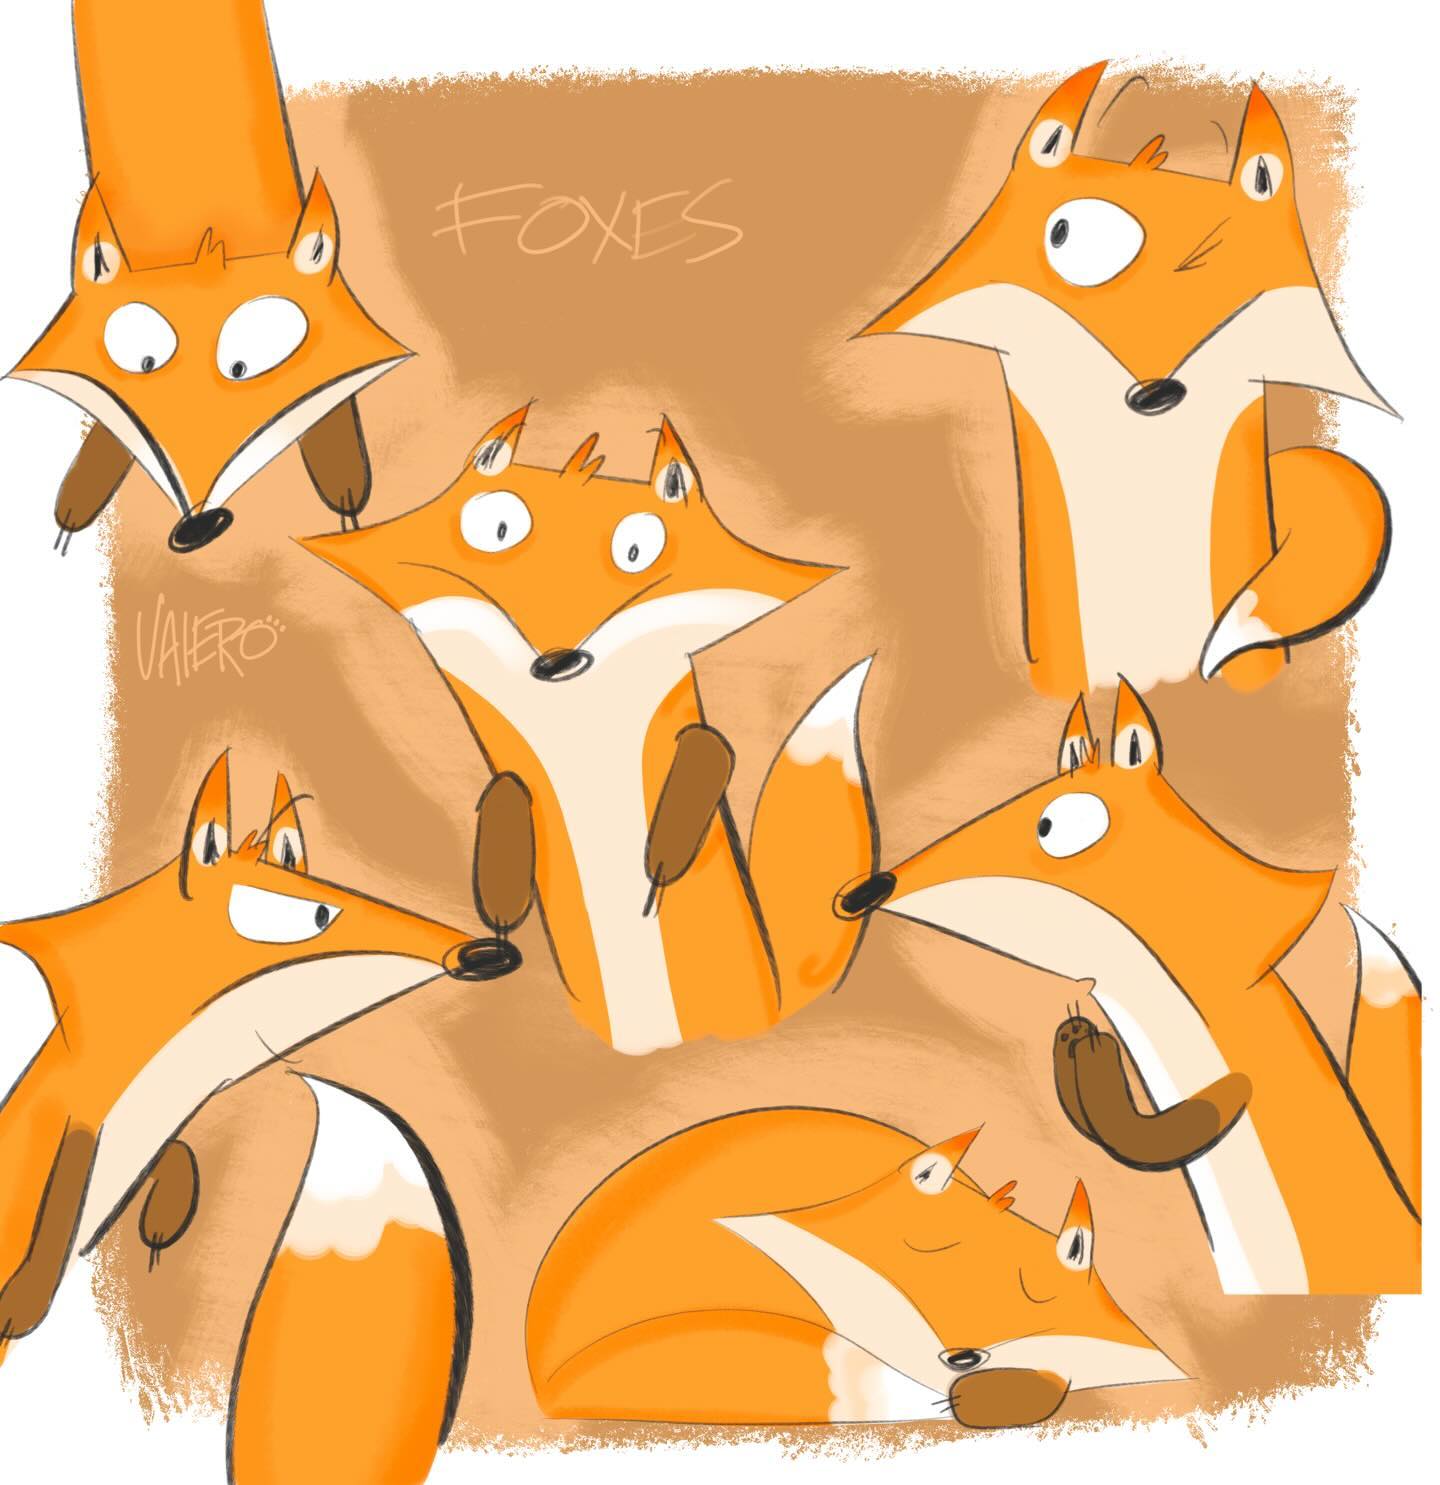 A Glimpse of Foxes